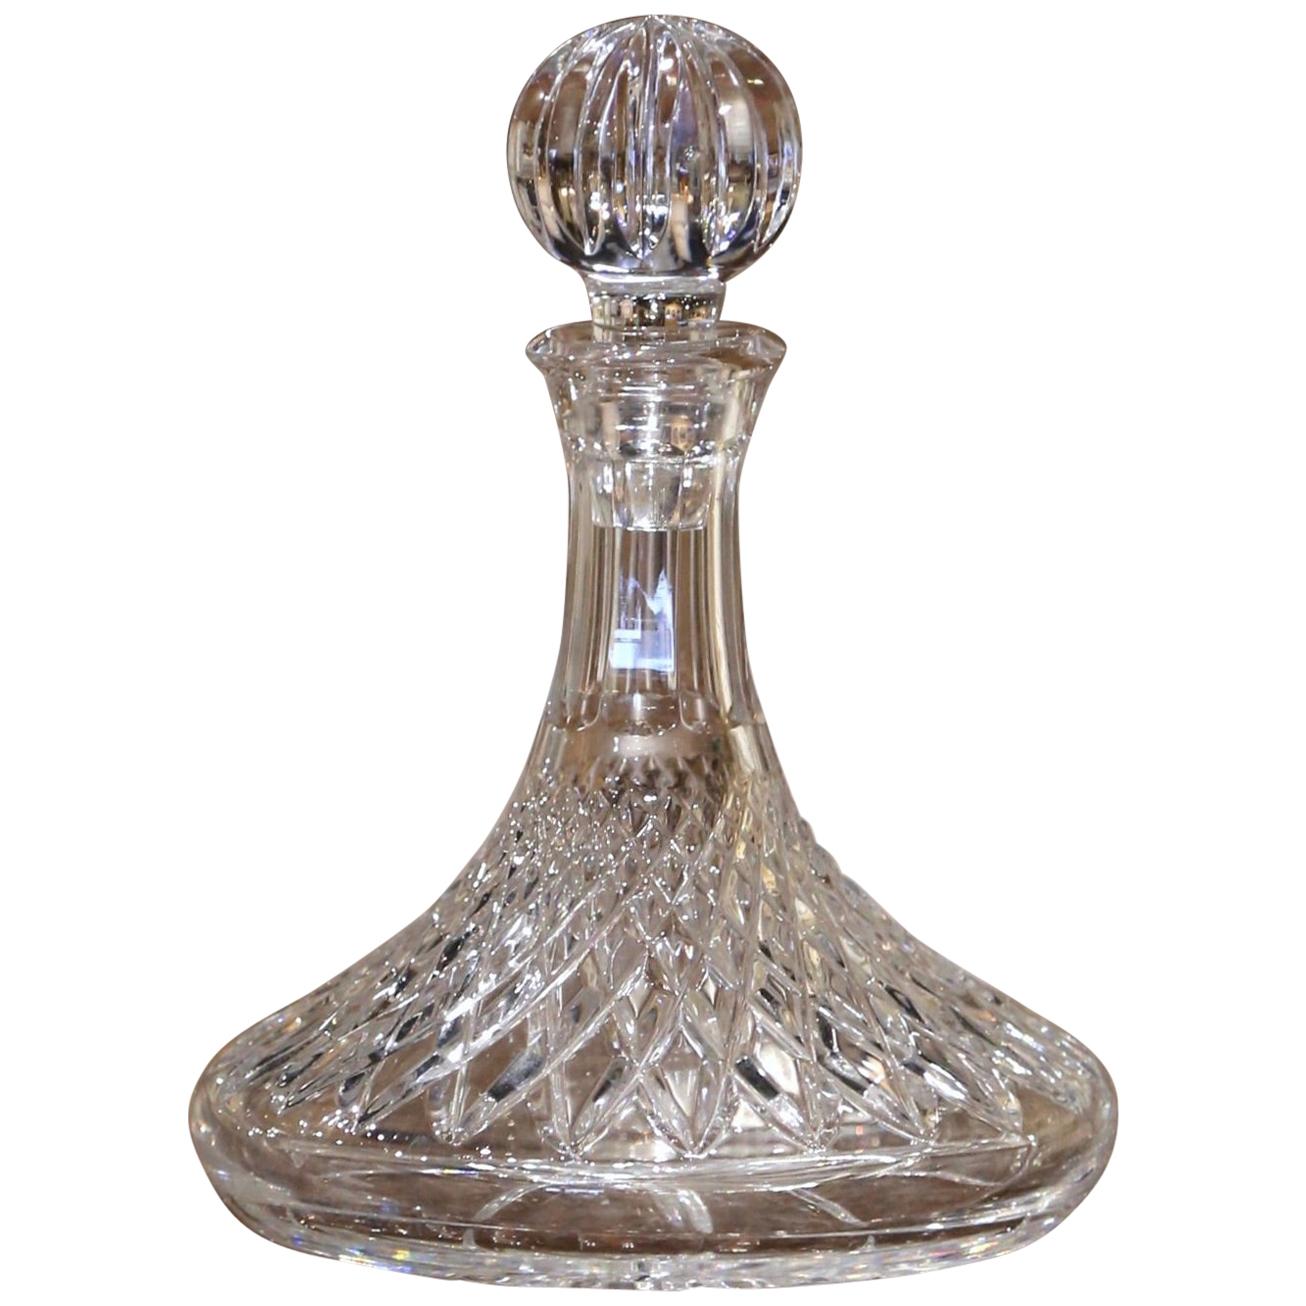 Midcentury French Cut Glass Wine Decanter with Stopper